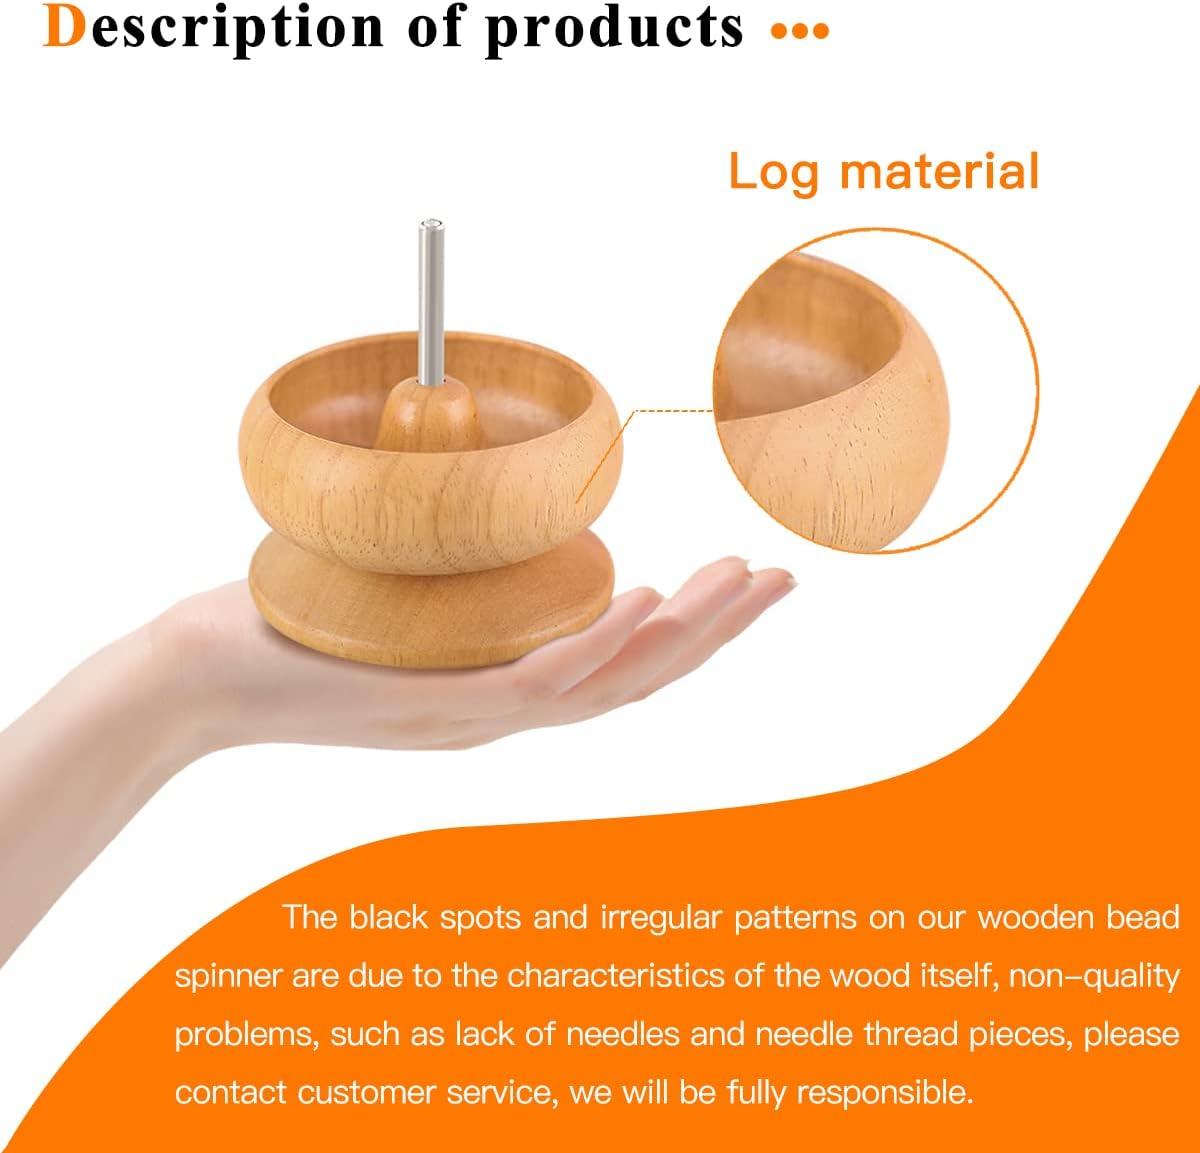 hobbyworker The Upgrade Version Wooden Bead Spinner with 2 Pcs Big Needles,8000 Pcs Seed Beads and 1 Surprise Gift Pack for Jewelry Making Tools